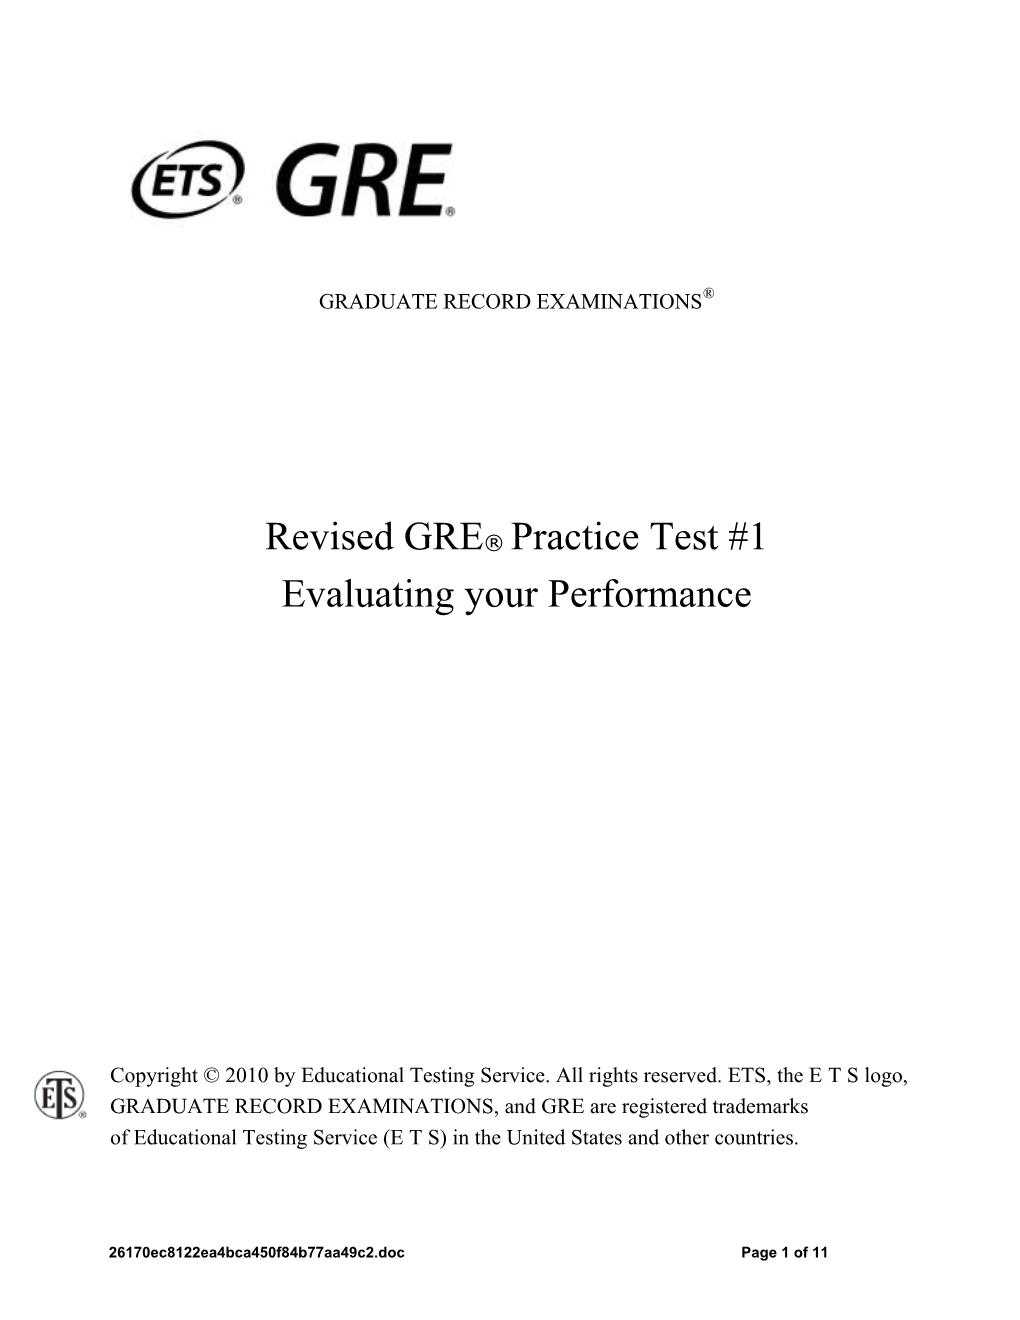 GRE Practice Test #1 Evaluating Your Performance